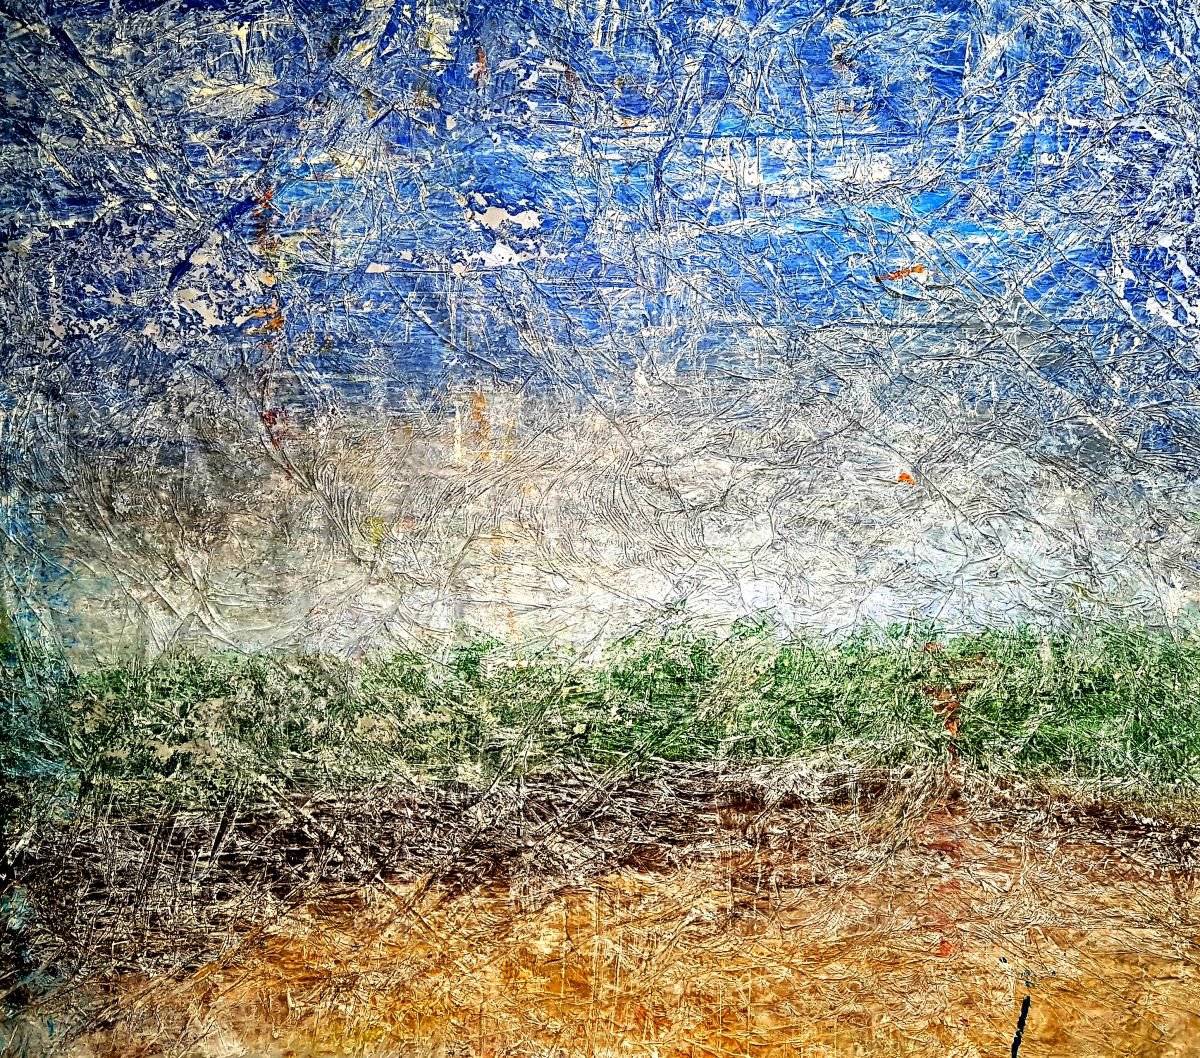 The flag of my country (n.236) - abstract landscape - 84 x 74 x 2,50 cm - ready to hang - by Alessio Mazzarulli